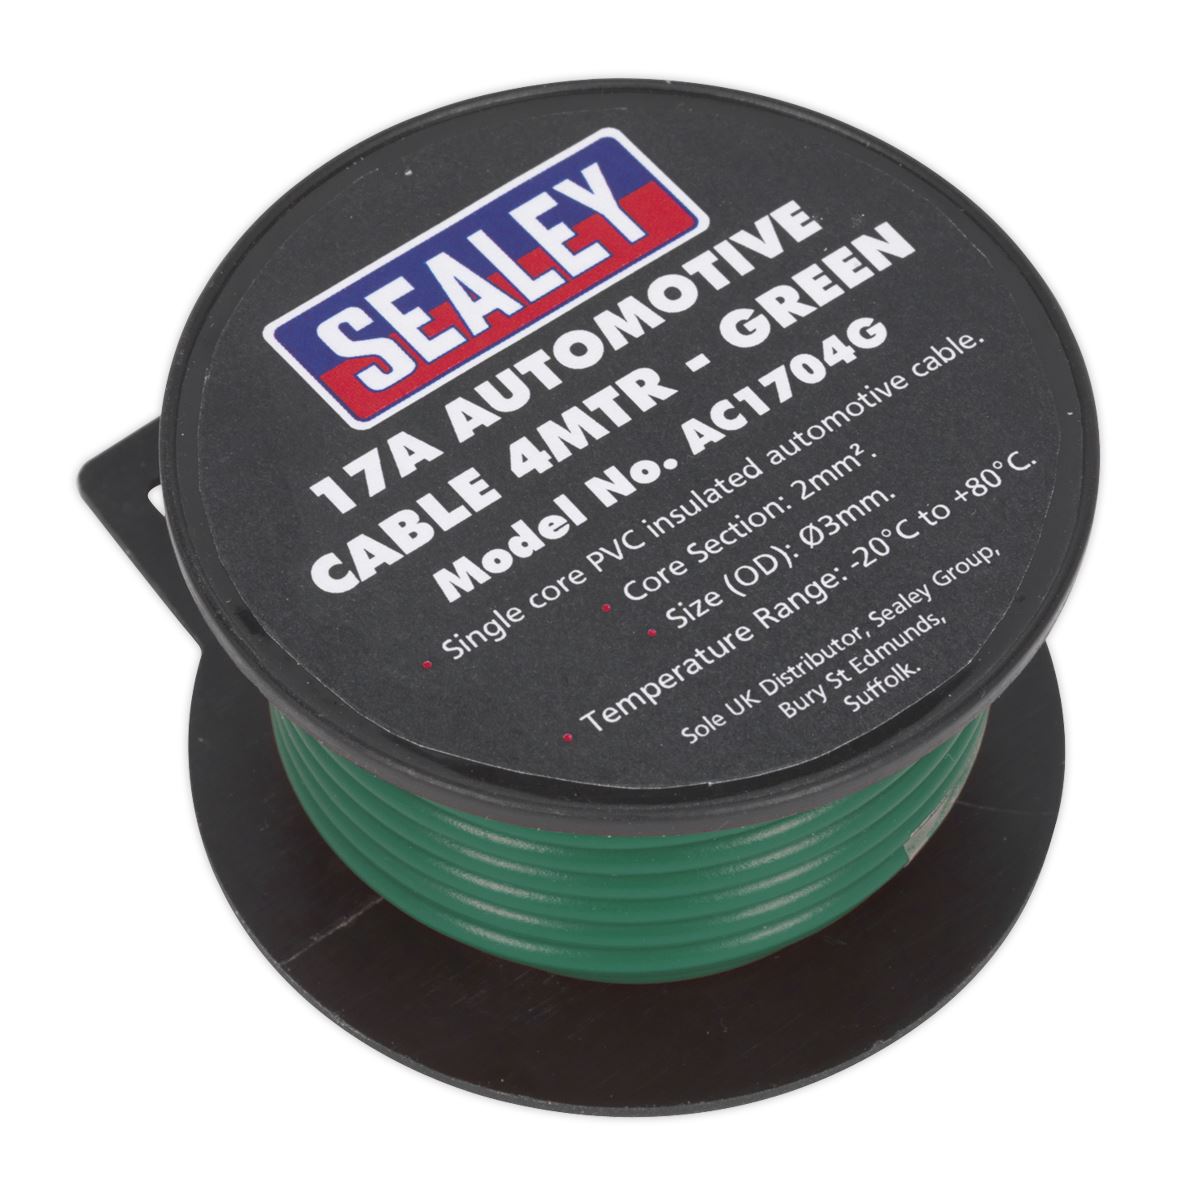 Sealey Automotive Cable Thick Wall 17A 4m Green